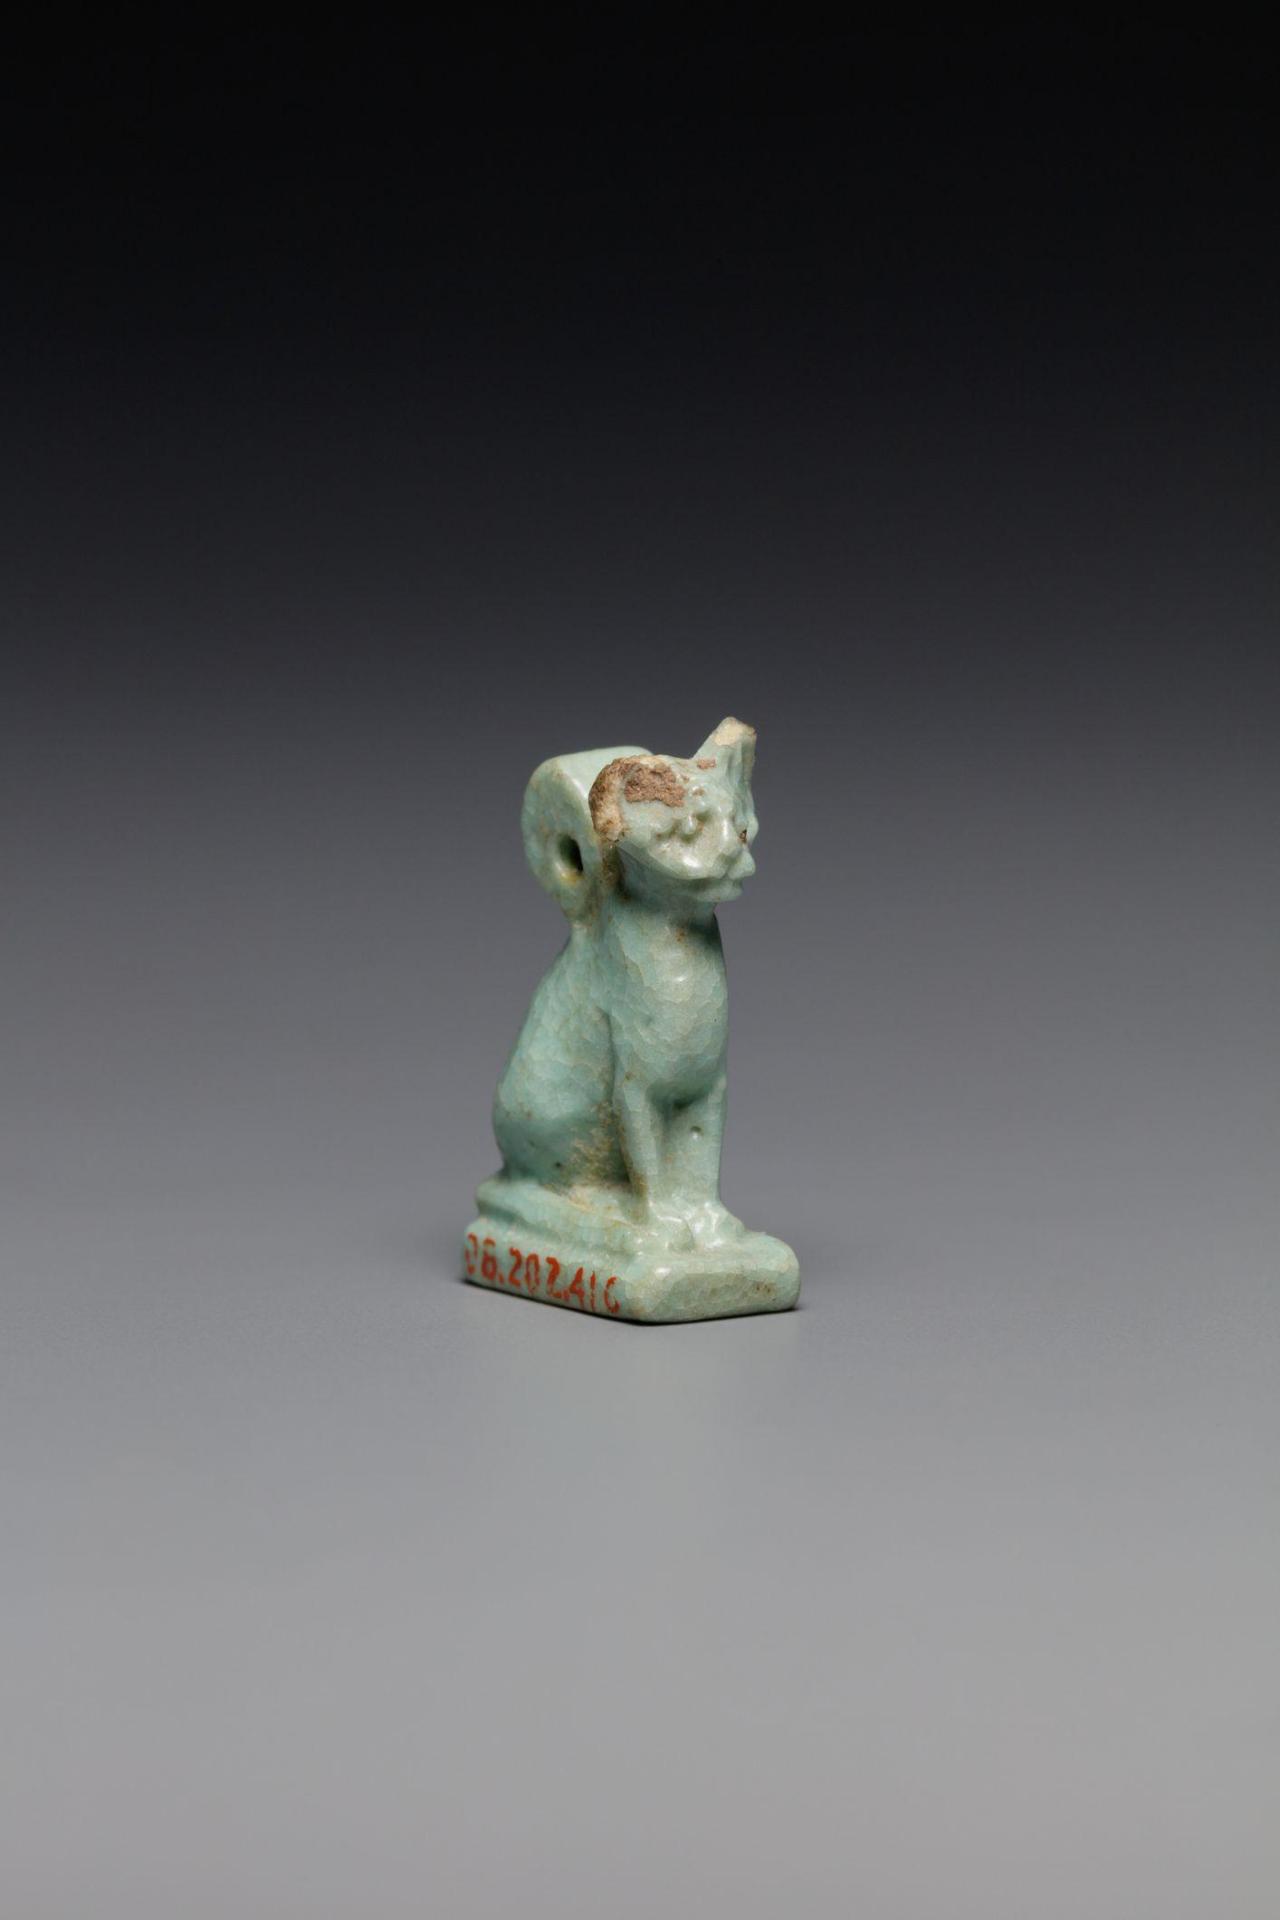 A blue amulet in the shape of a cat, with visible aging.